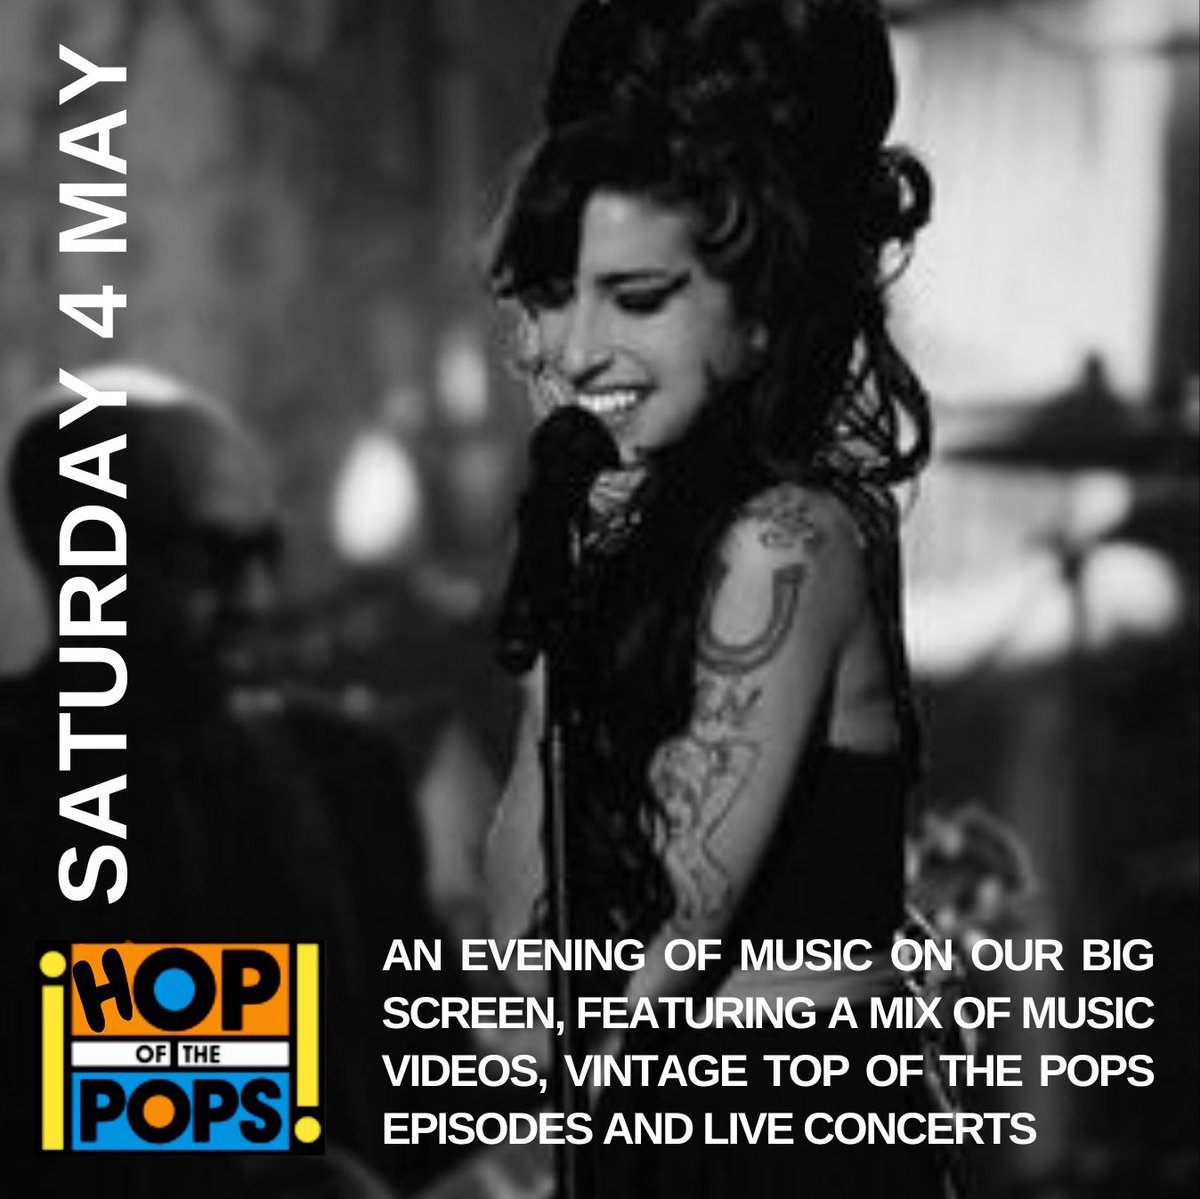 Open from midday 👍 Tonight on our big screen... 6.30pm - Music Video Playlist 7.30pm - 1992 TOTP 8.00pm - Amy Winehouse Live #colwynbay #alehouse #pub